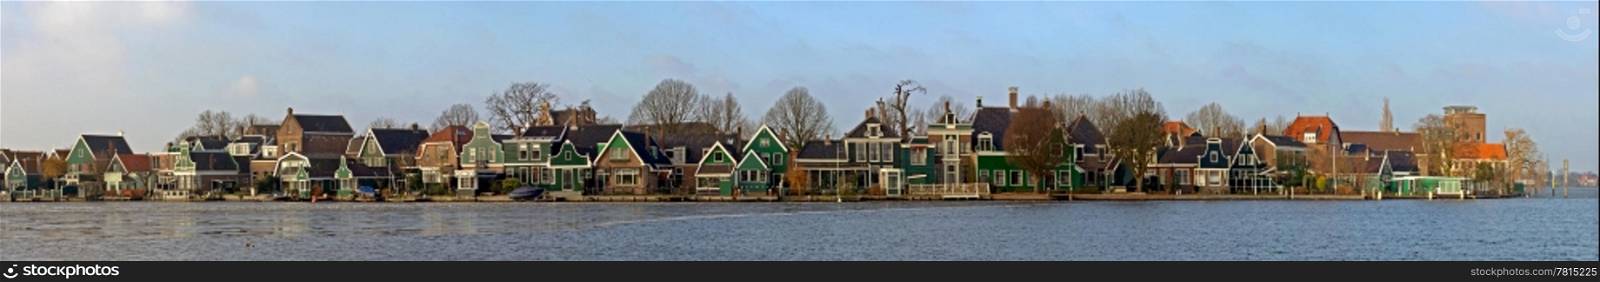 The old, picturesque houses of Zaanse Schans along the river side of the Zaan on a cold winter morning